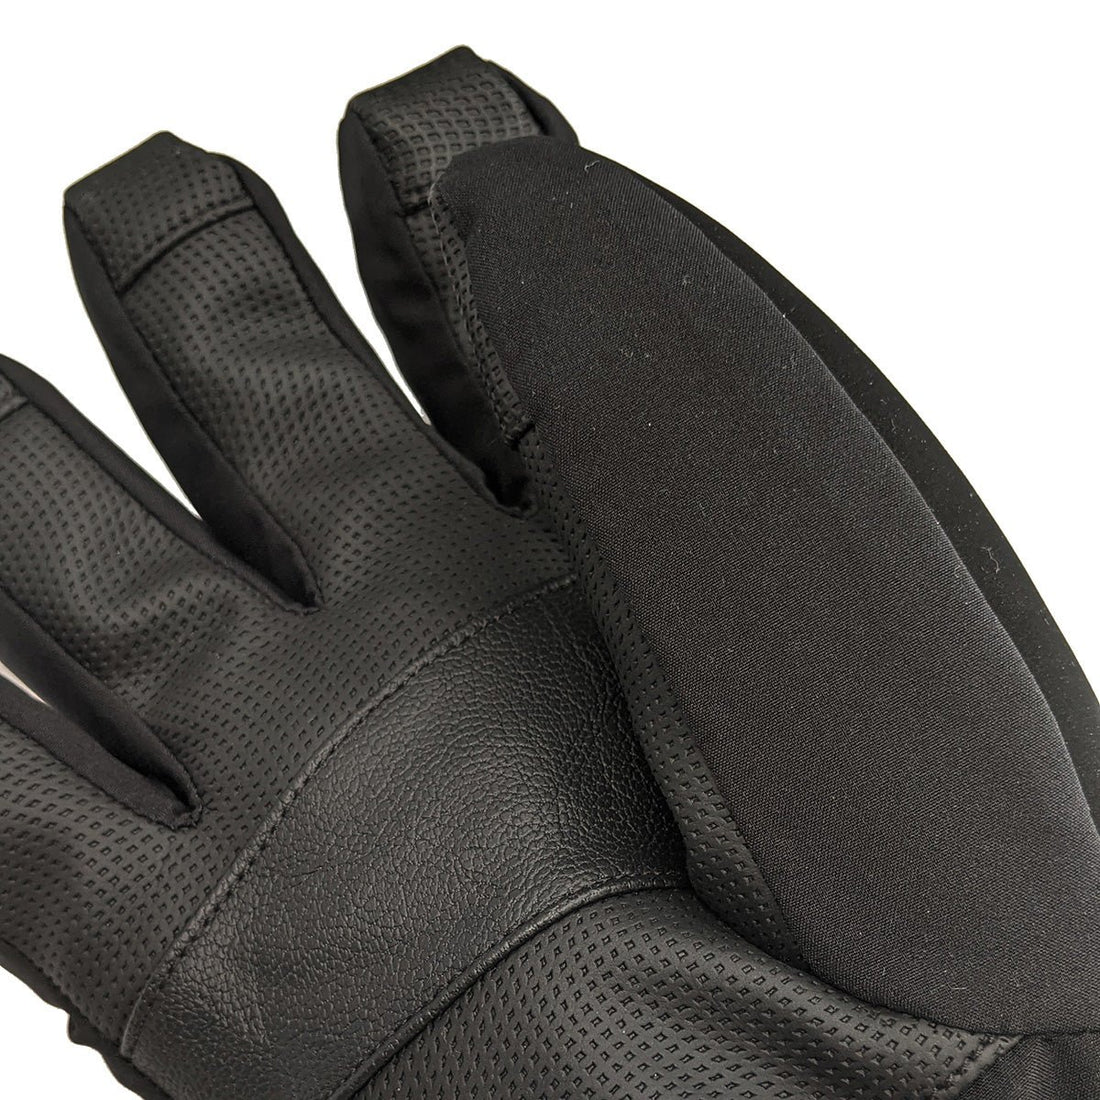 The Top 10 Benefits of Owning a Max Ski Glove - CTR Outdoors